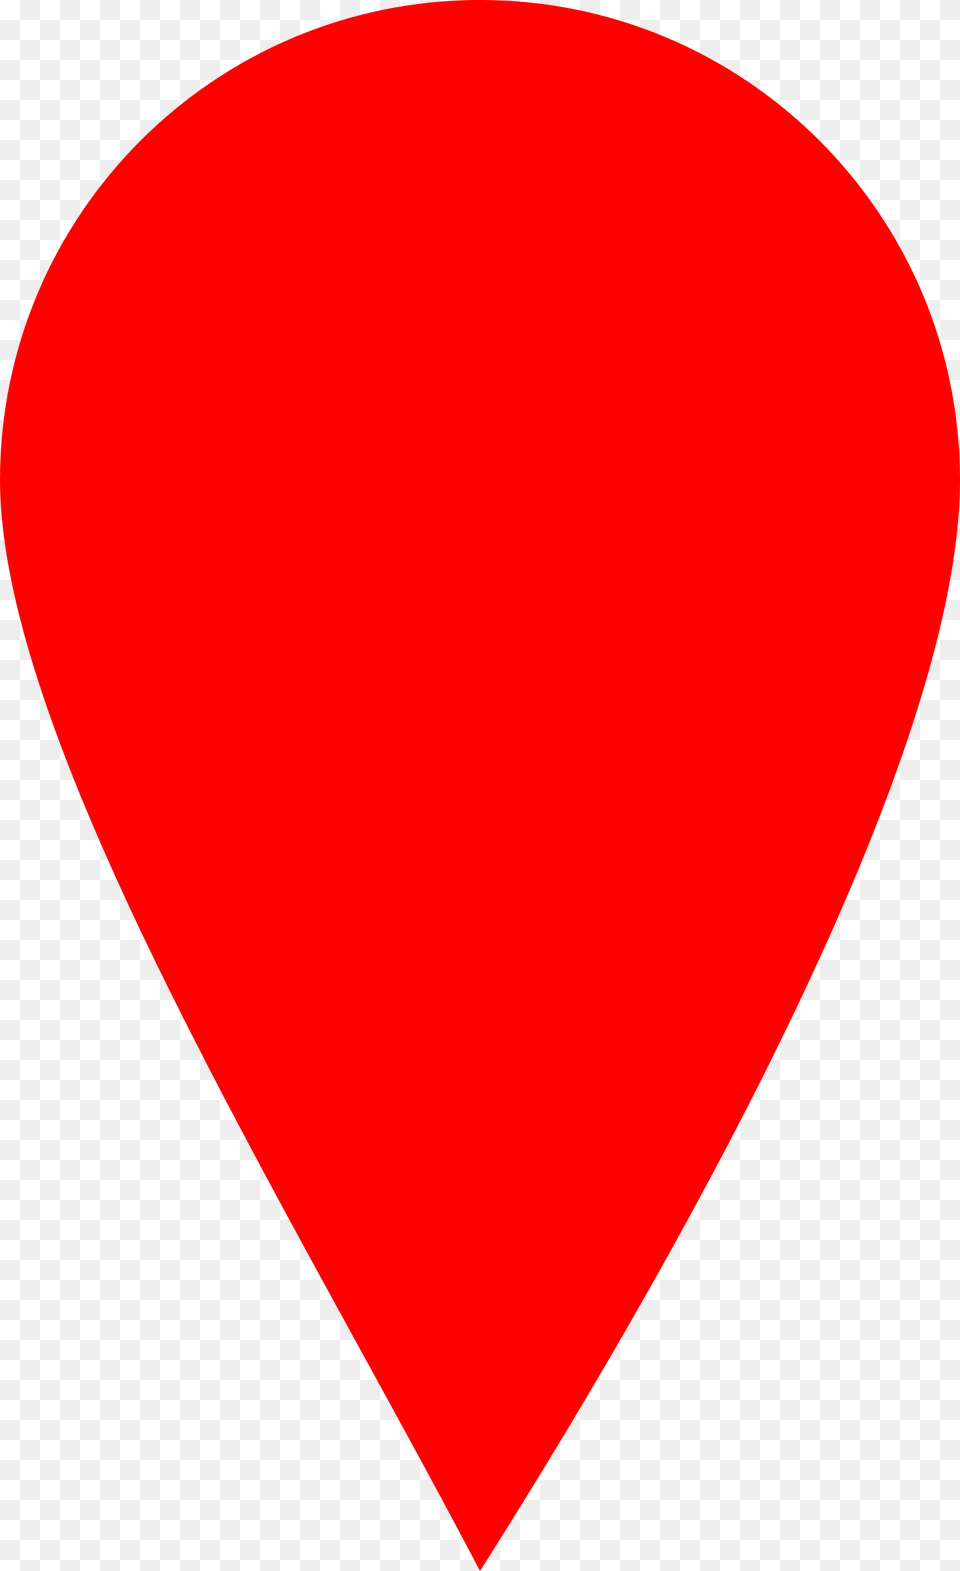 Red Map Locator Marker Icons, Guitar, Musical Instrument, Balloon, Plectrum Png